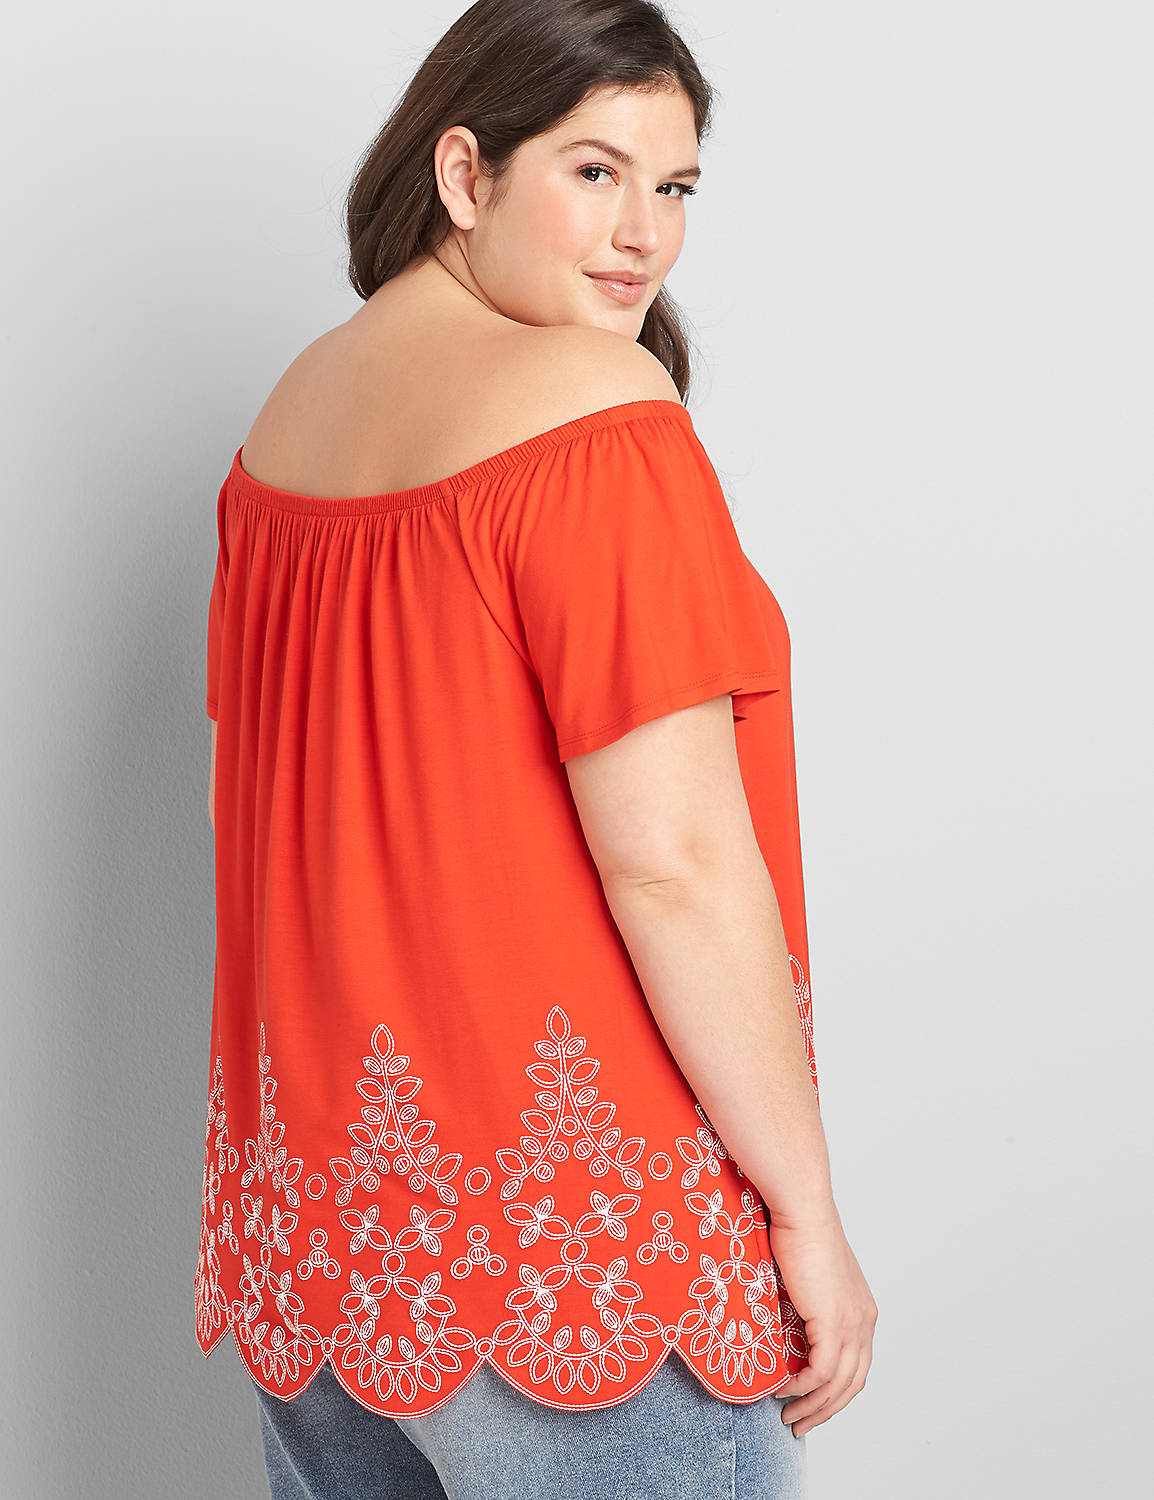 Off-The-Shoulder Swing Top With Printed Hem Product Image 2